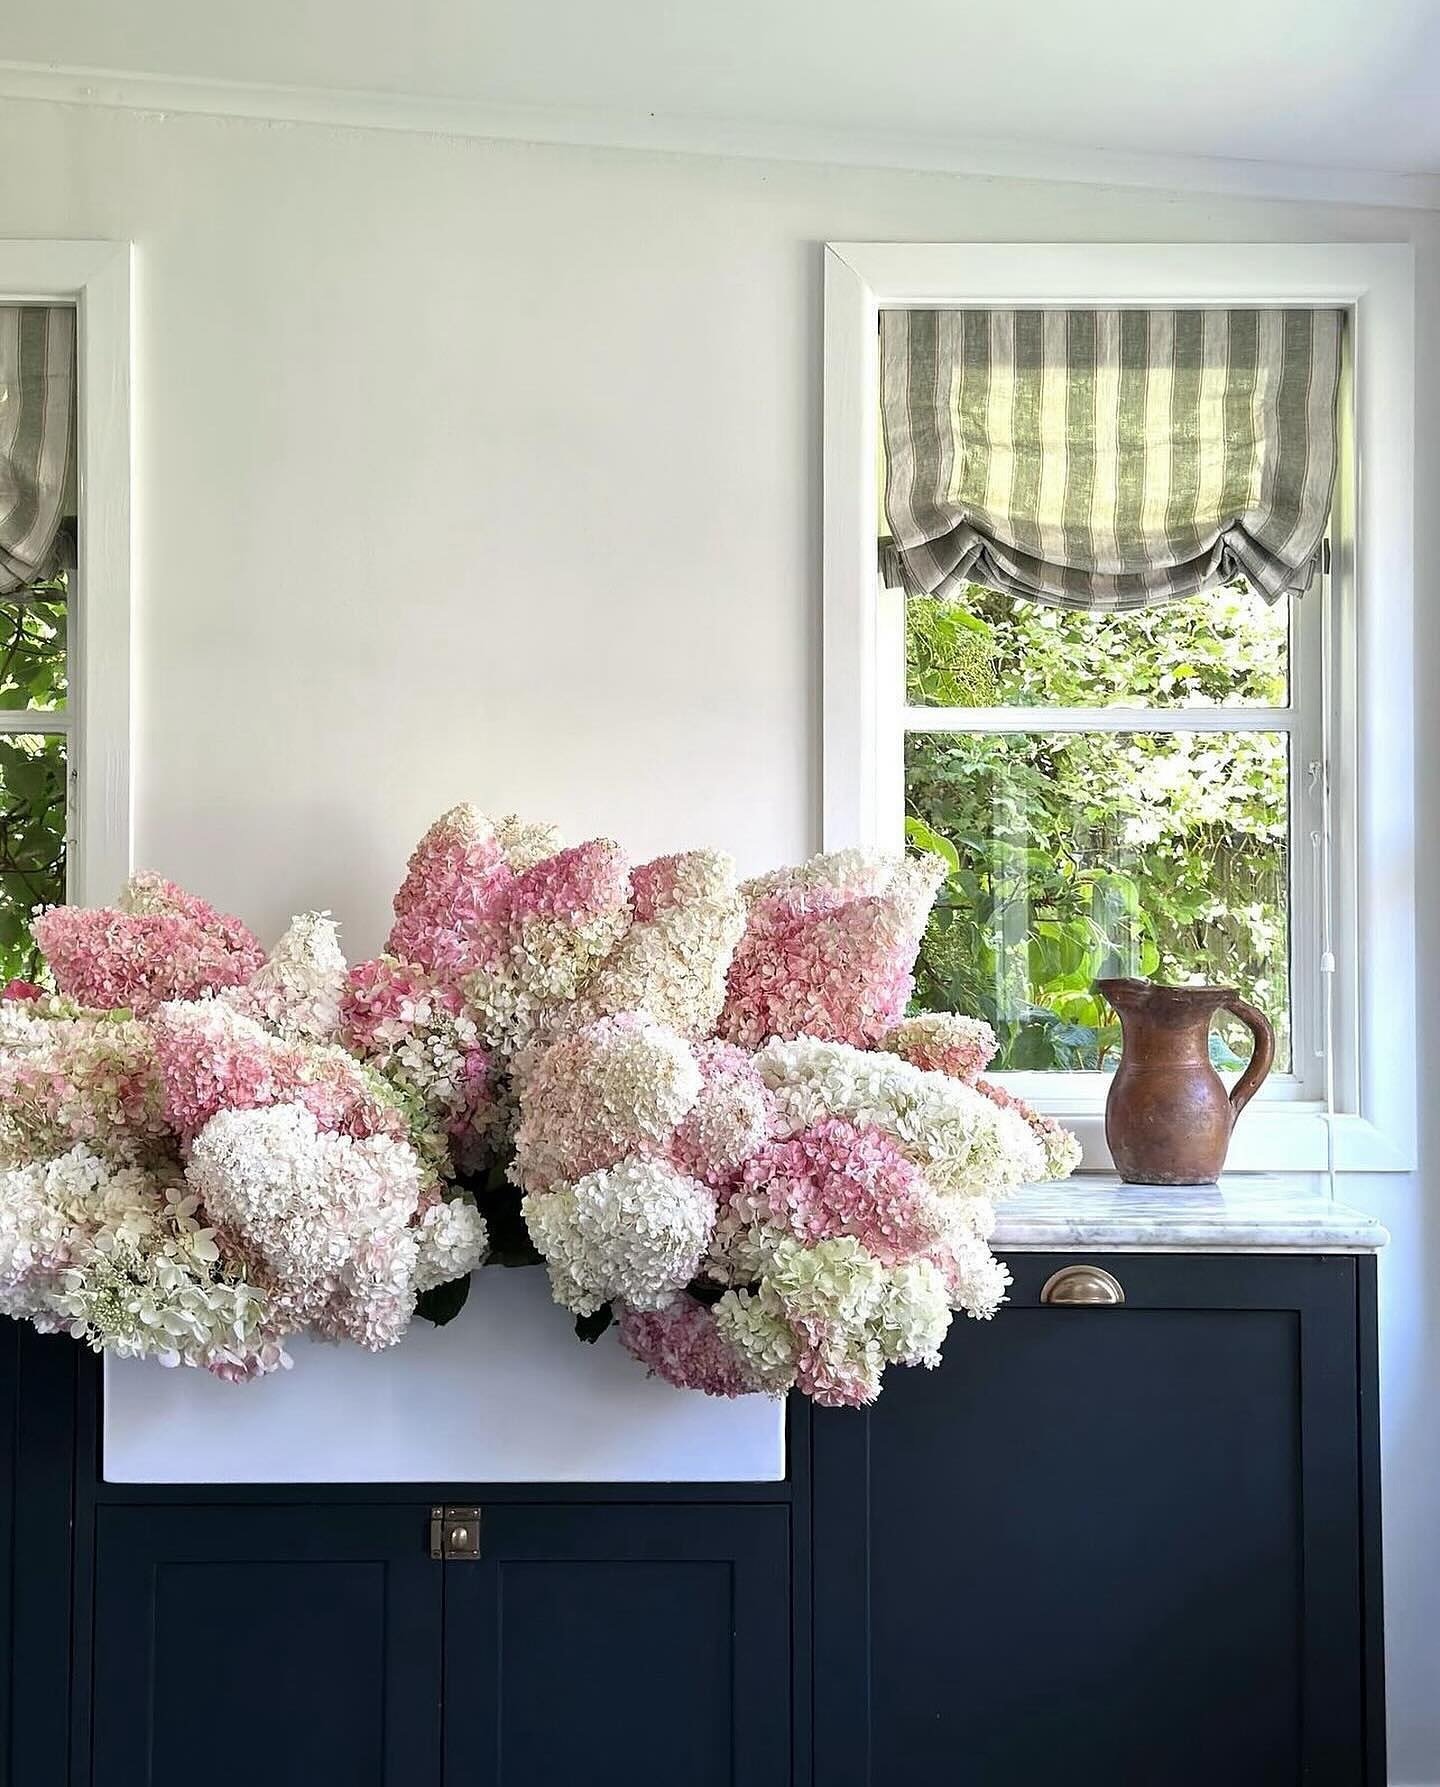 There&rsquo;s nothing quite like fresh flowers to kick off the new month! Who else is excited for hydrangea season?! 💐 // Photo by @ellagreyinteriors